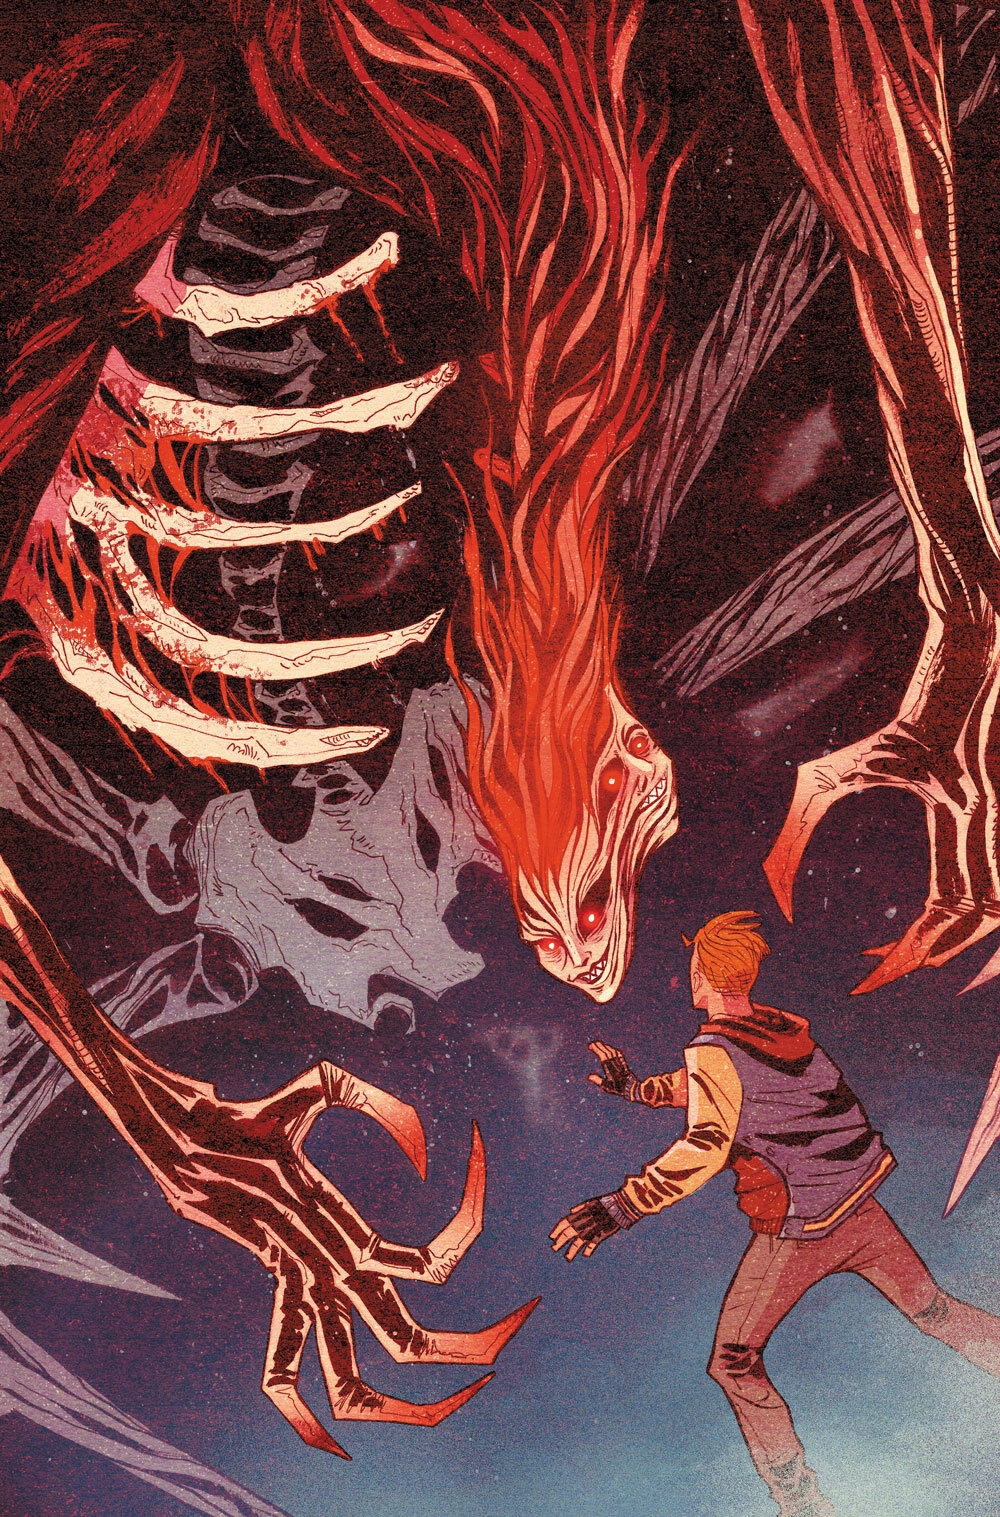 An Archie Comics page. Archie faces off against a skeletal, clawed monster with demonic red eyes and red hari.